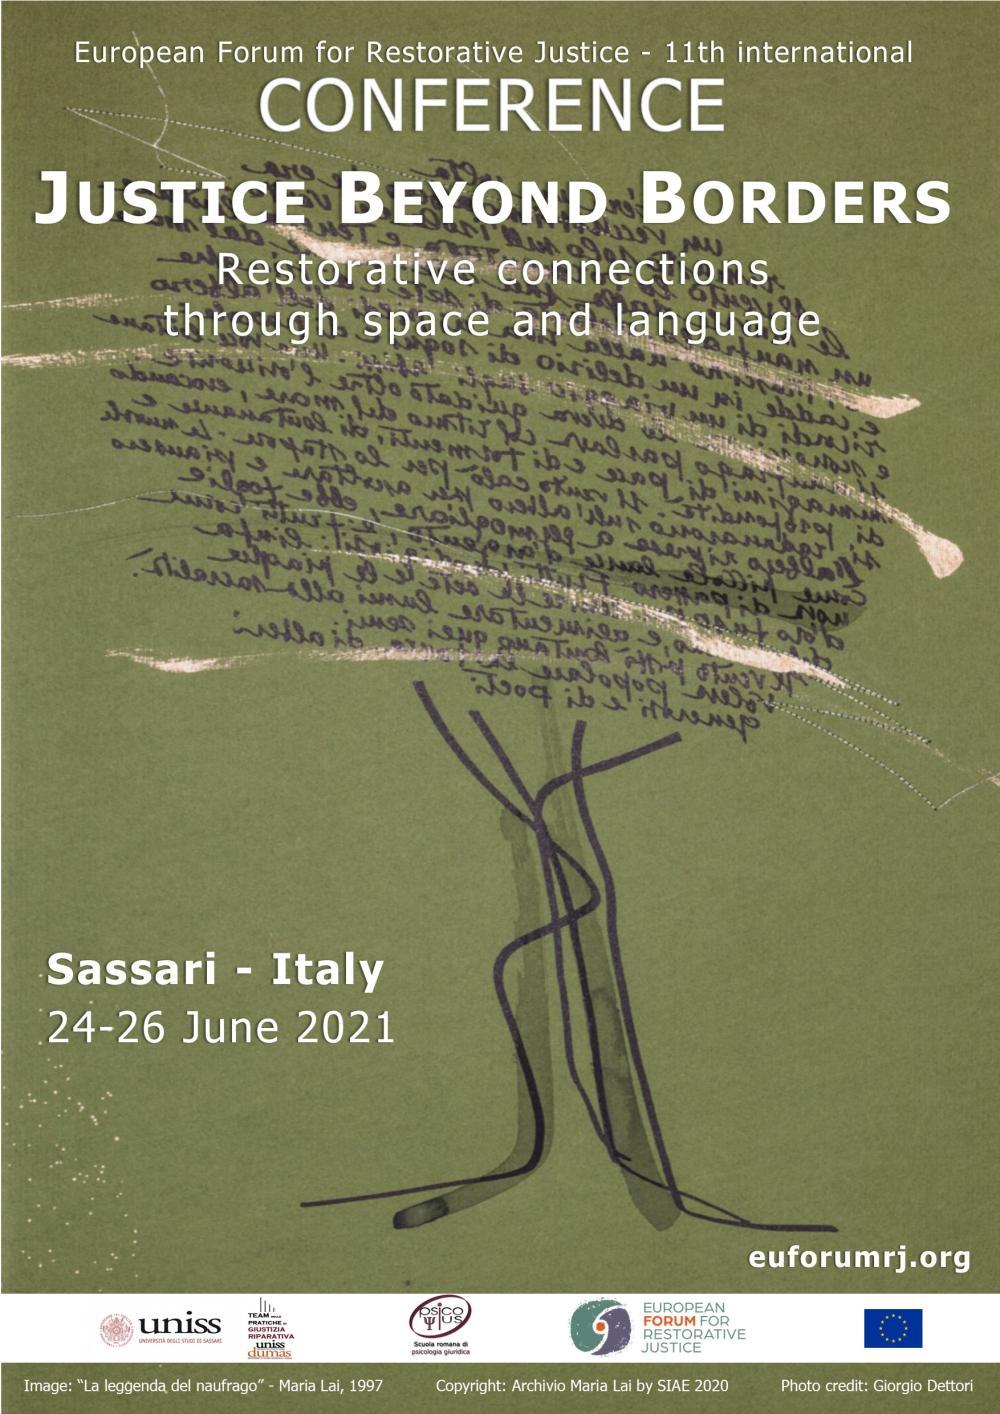 Poster of the EFRJ conference in Sassari